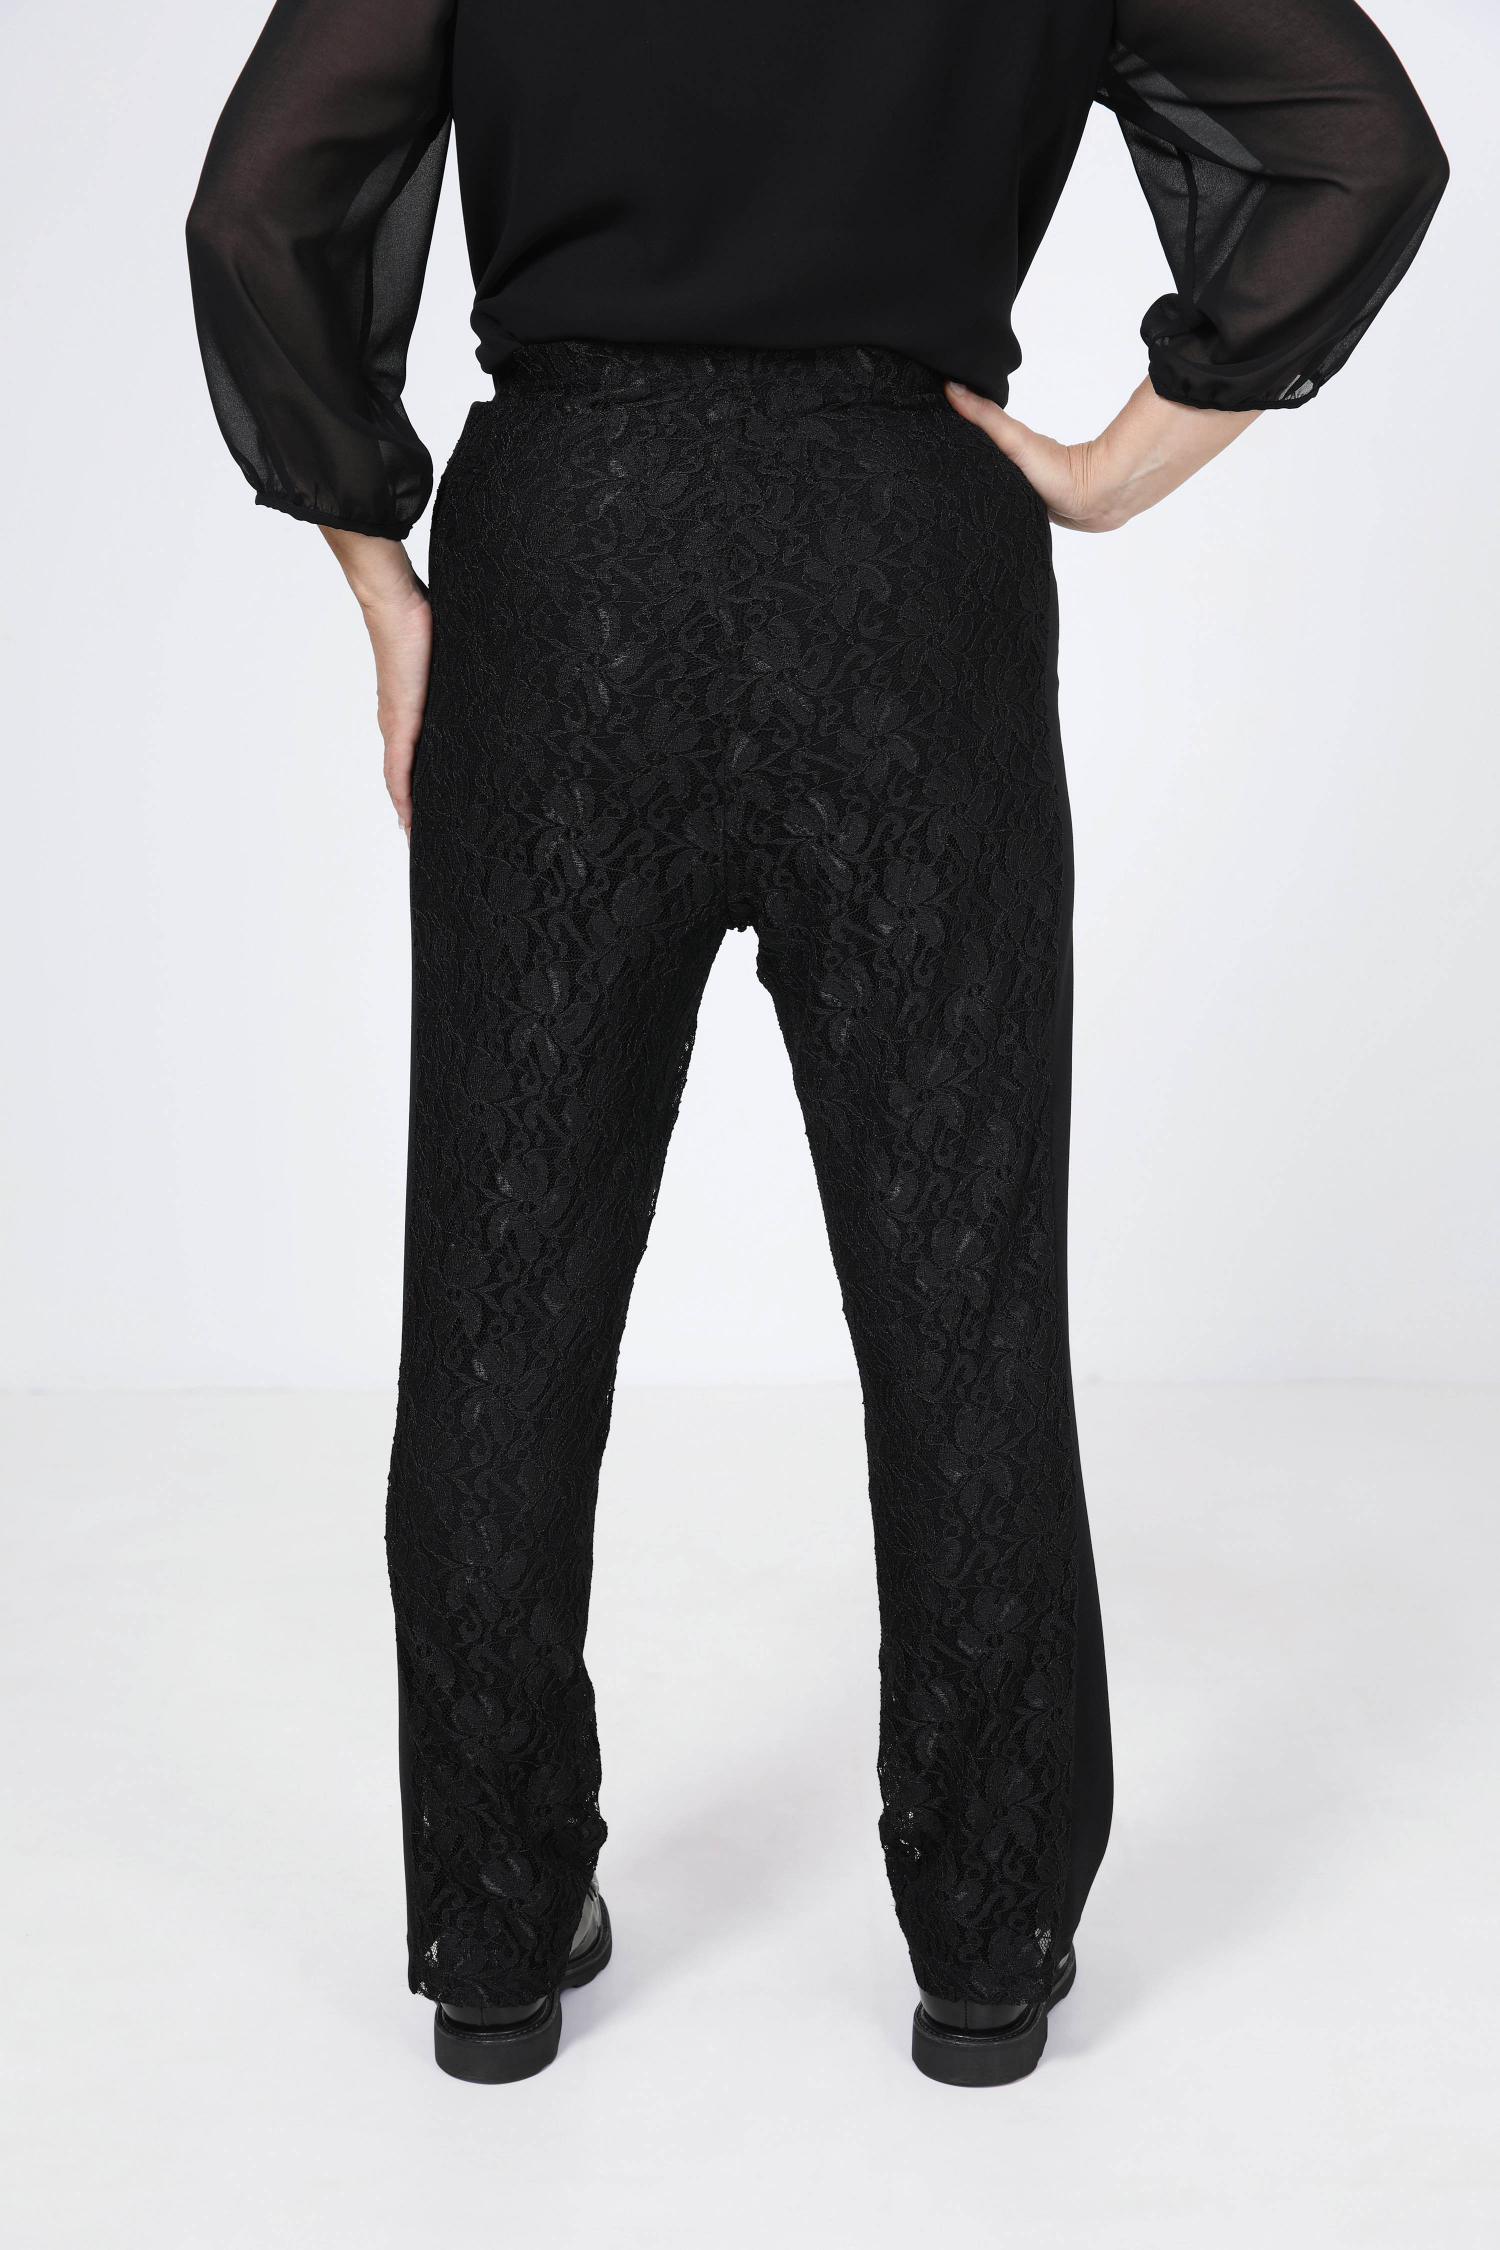 Dual-material lace and crepe pants